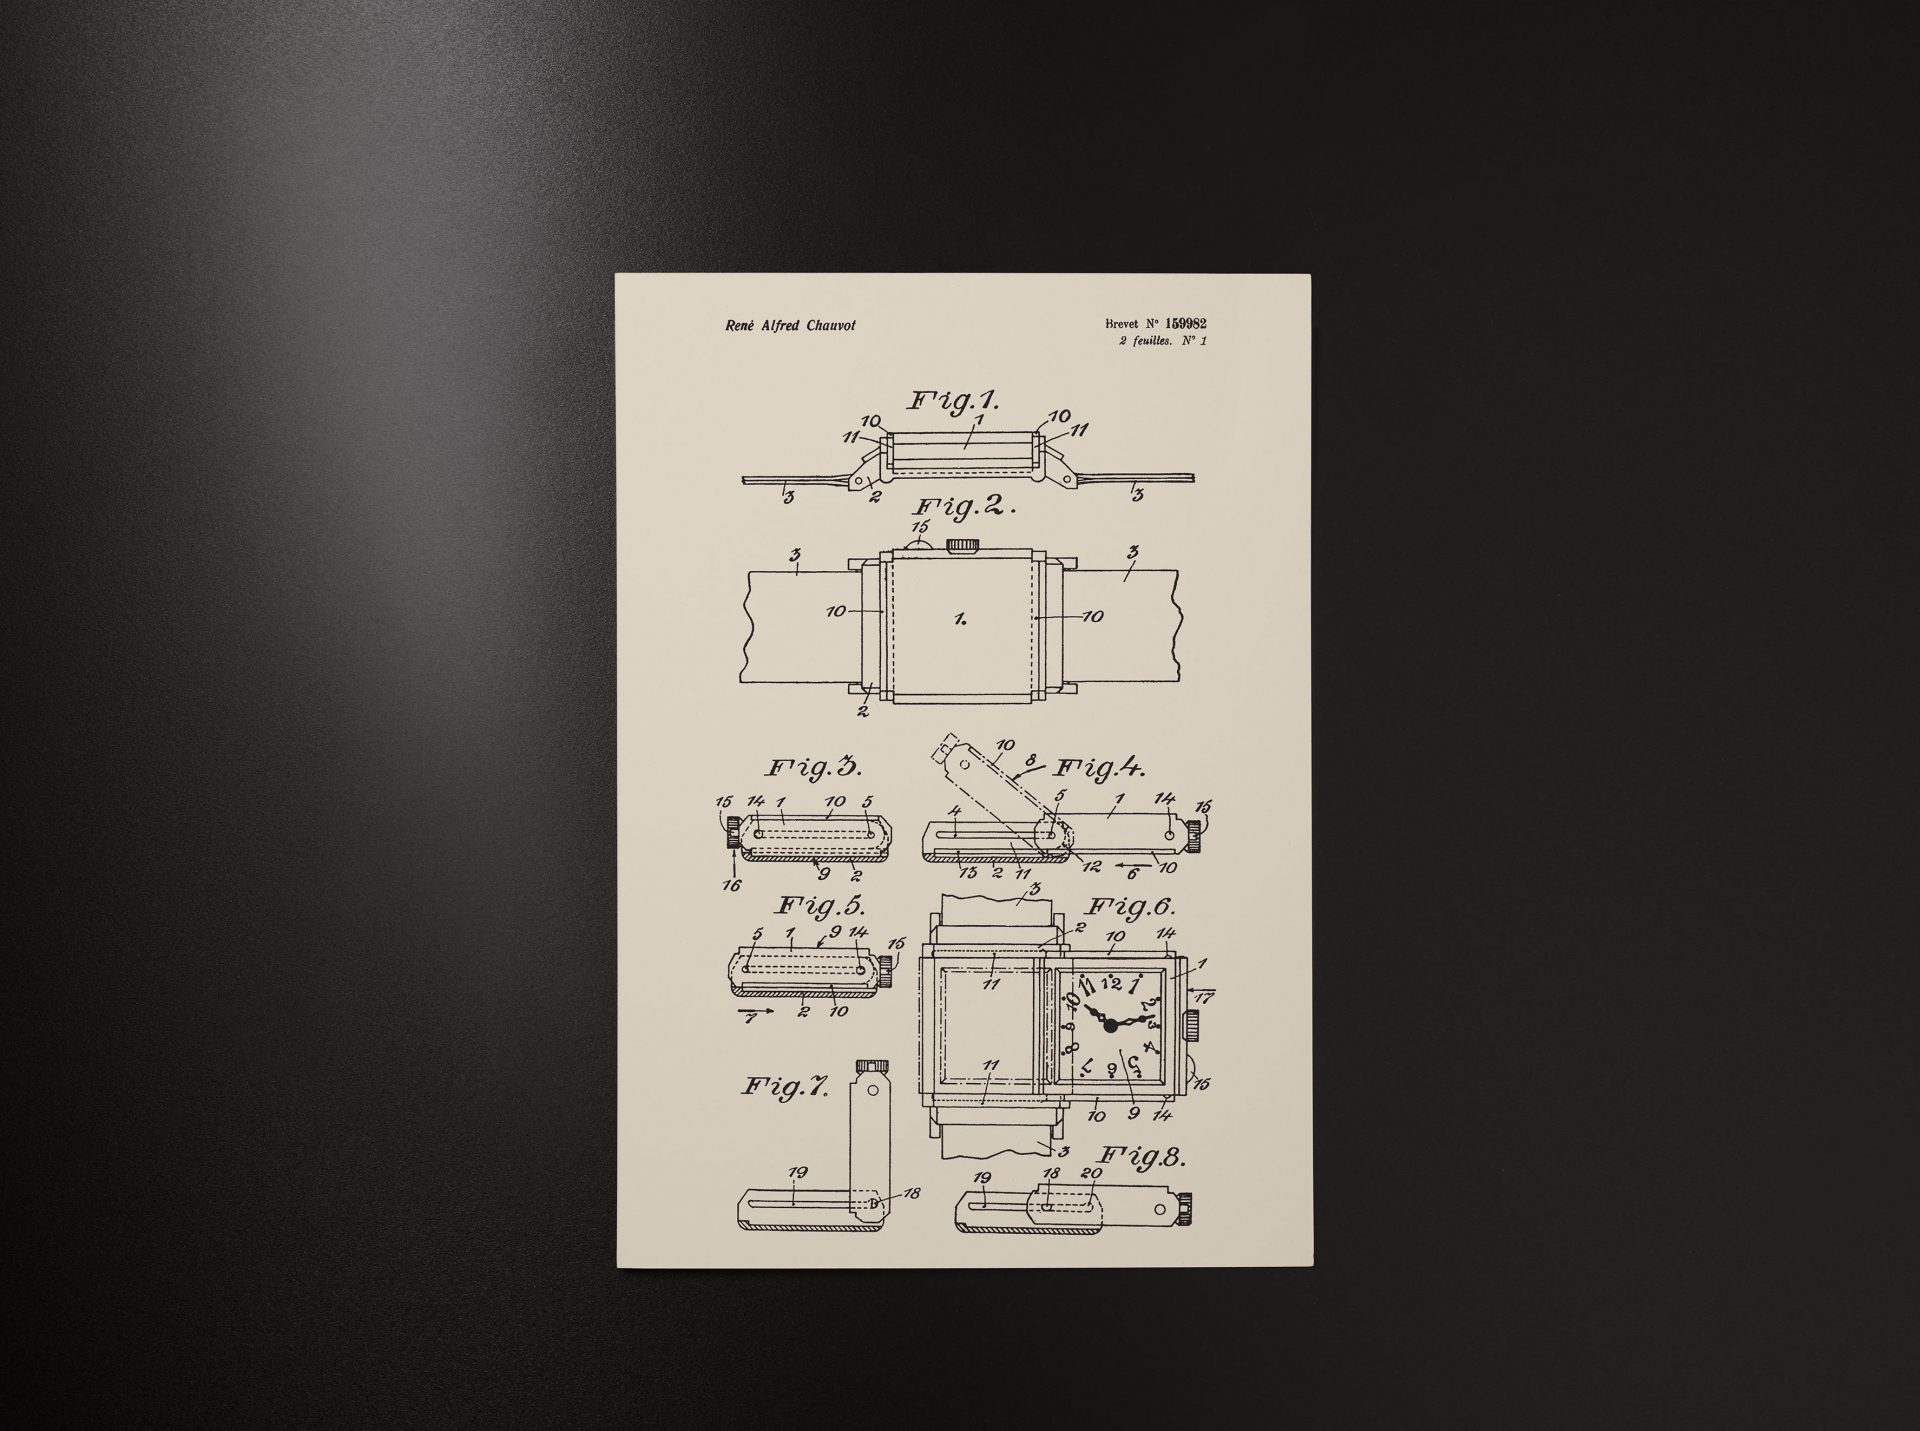 Original patent for Jaeger-LeCoultre Reverso case drawings in The Flippin’ History of the Reverso for A Collected Man